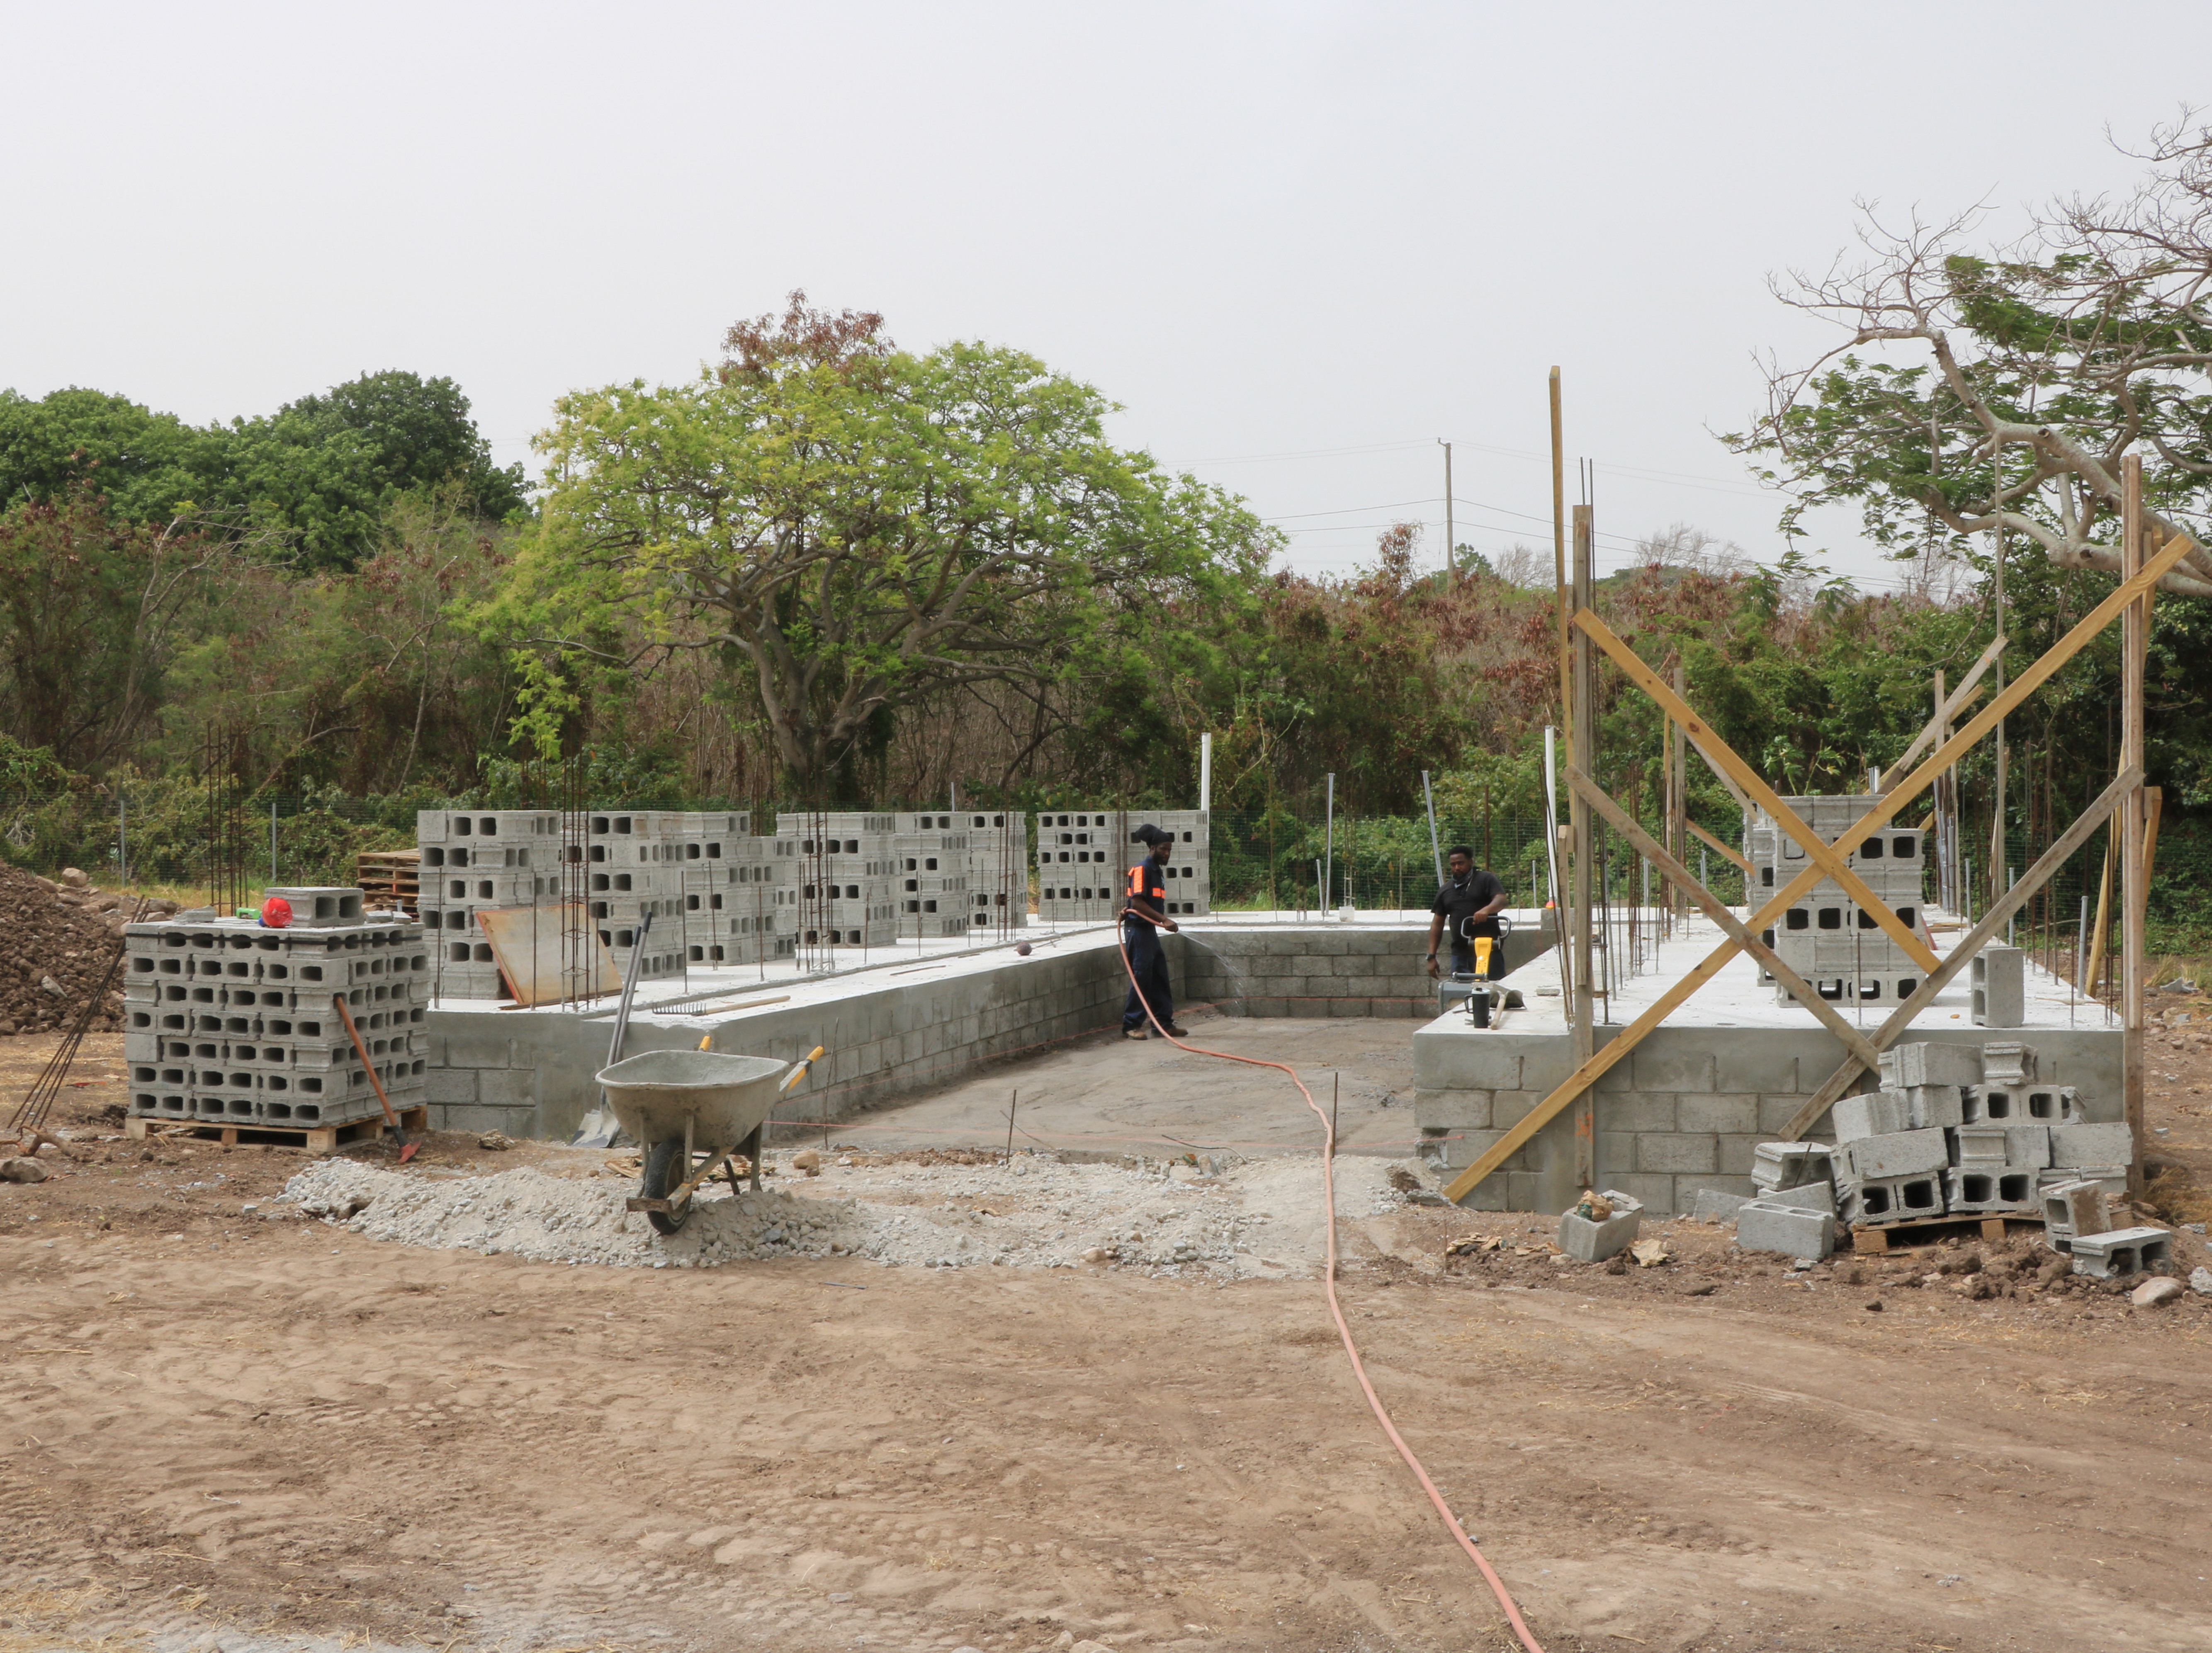 Members of the Building Division in the Public Works Department working on constructing a cold storage facility on the government-owned farm at Prospect on June 22, 2020